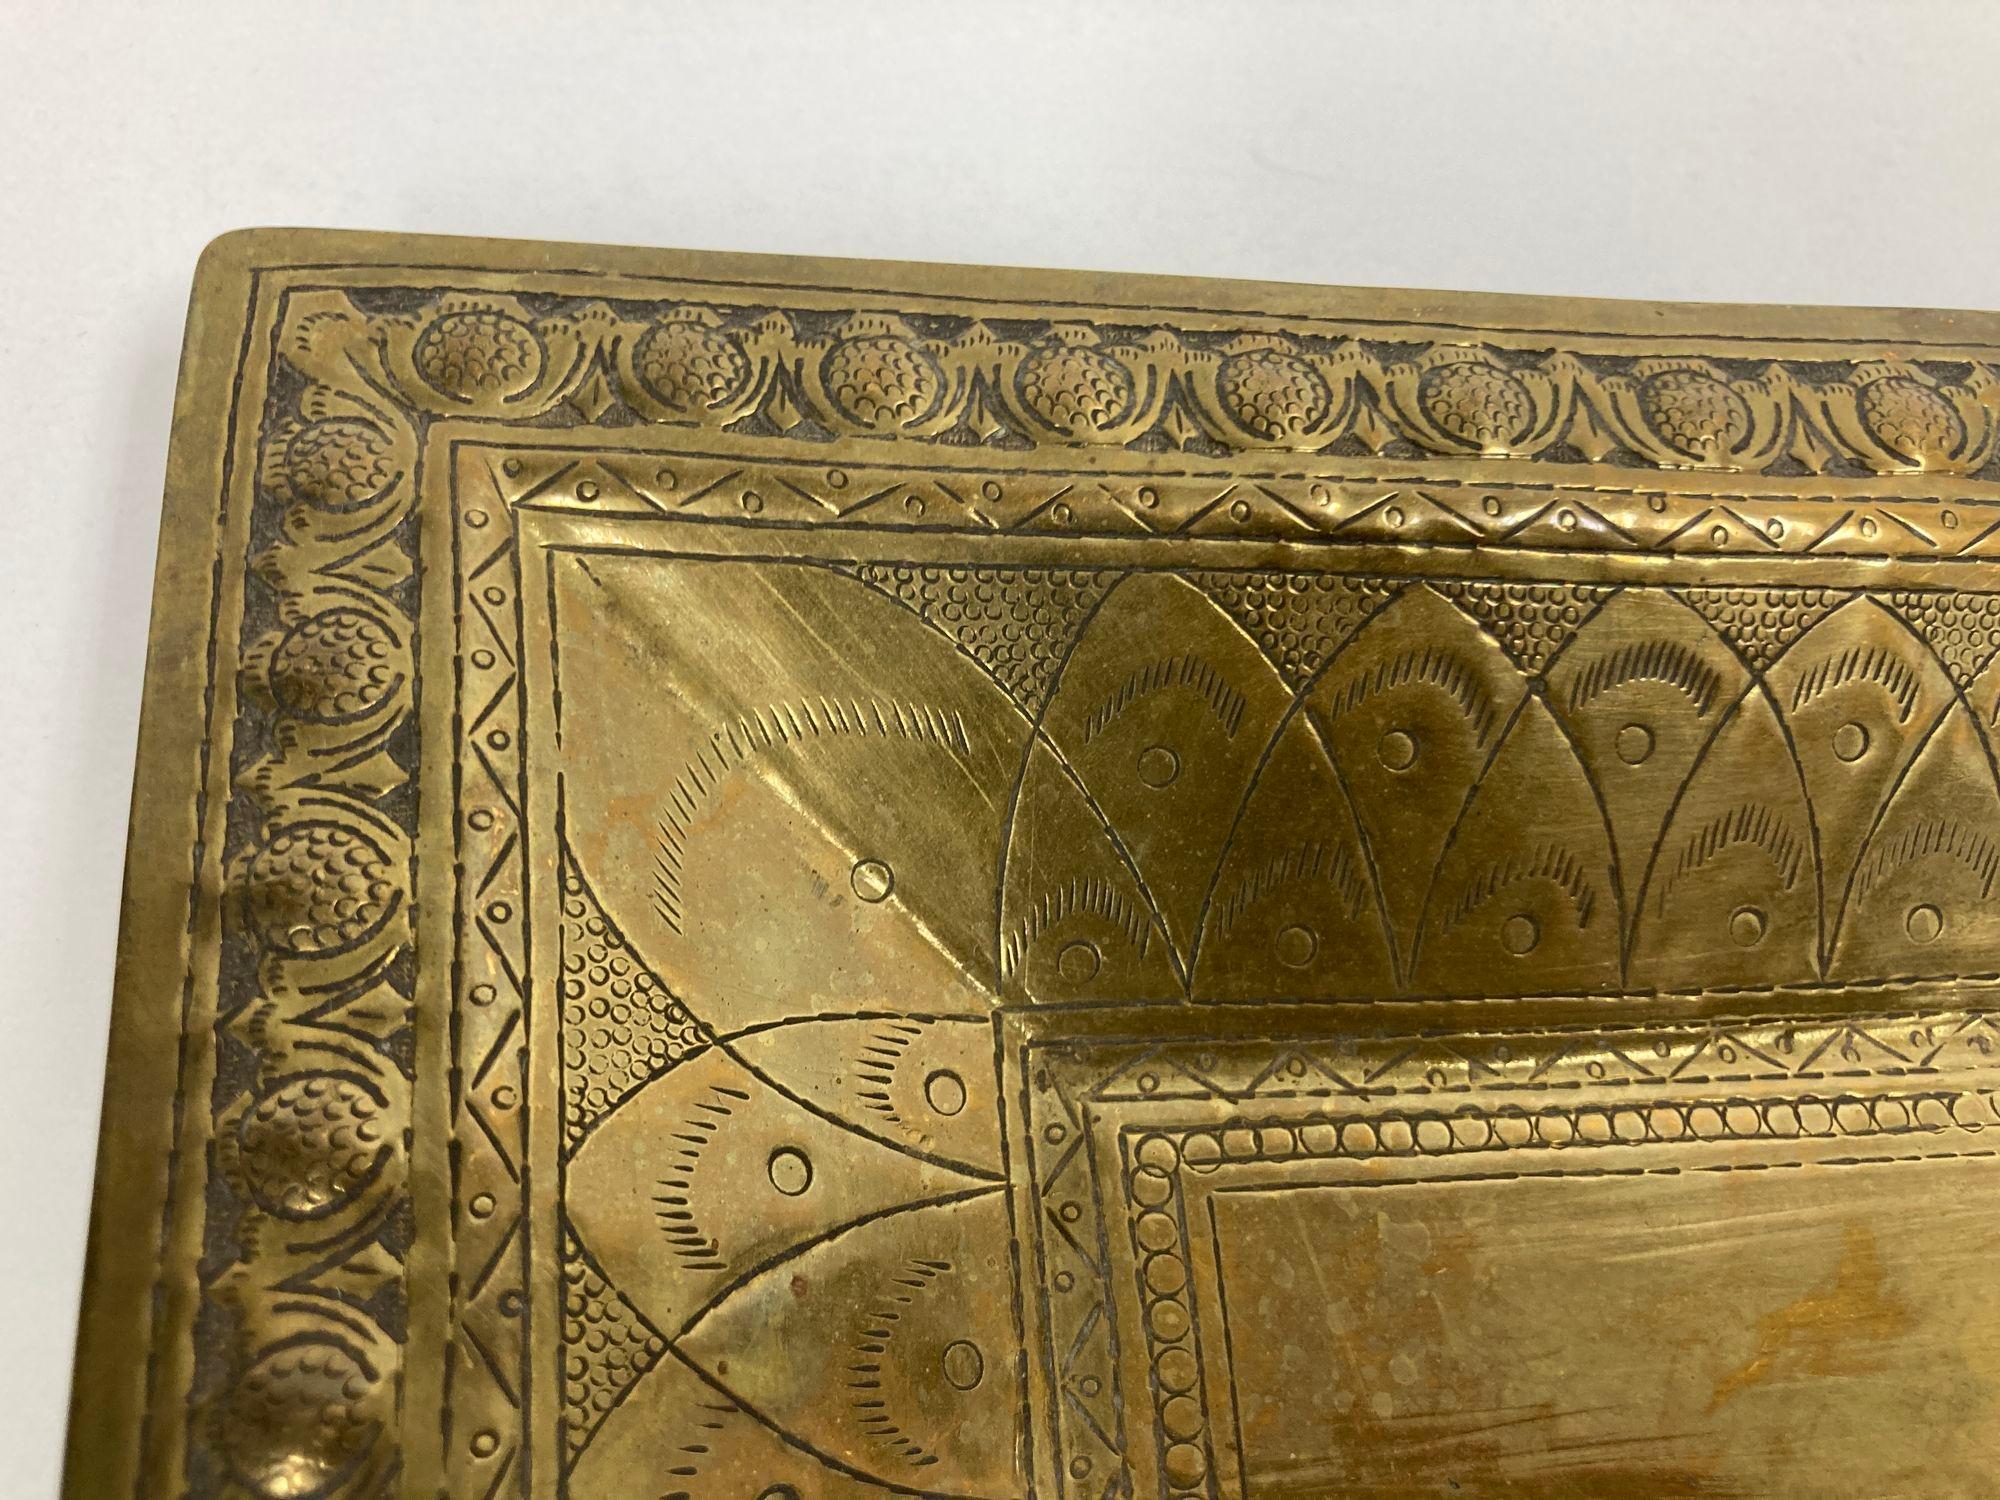 Vintage Brass Tray Indian Mughal Elephants Motif Engraved Serving Platter In Good Condition For Sale In North Hollywood, CA